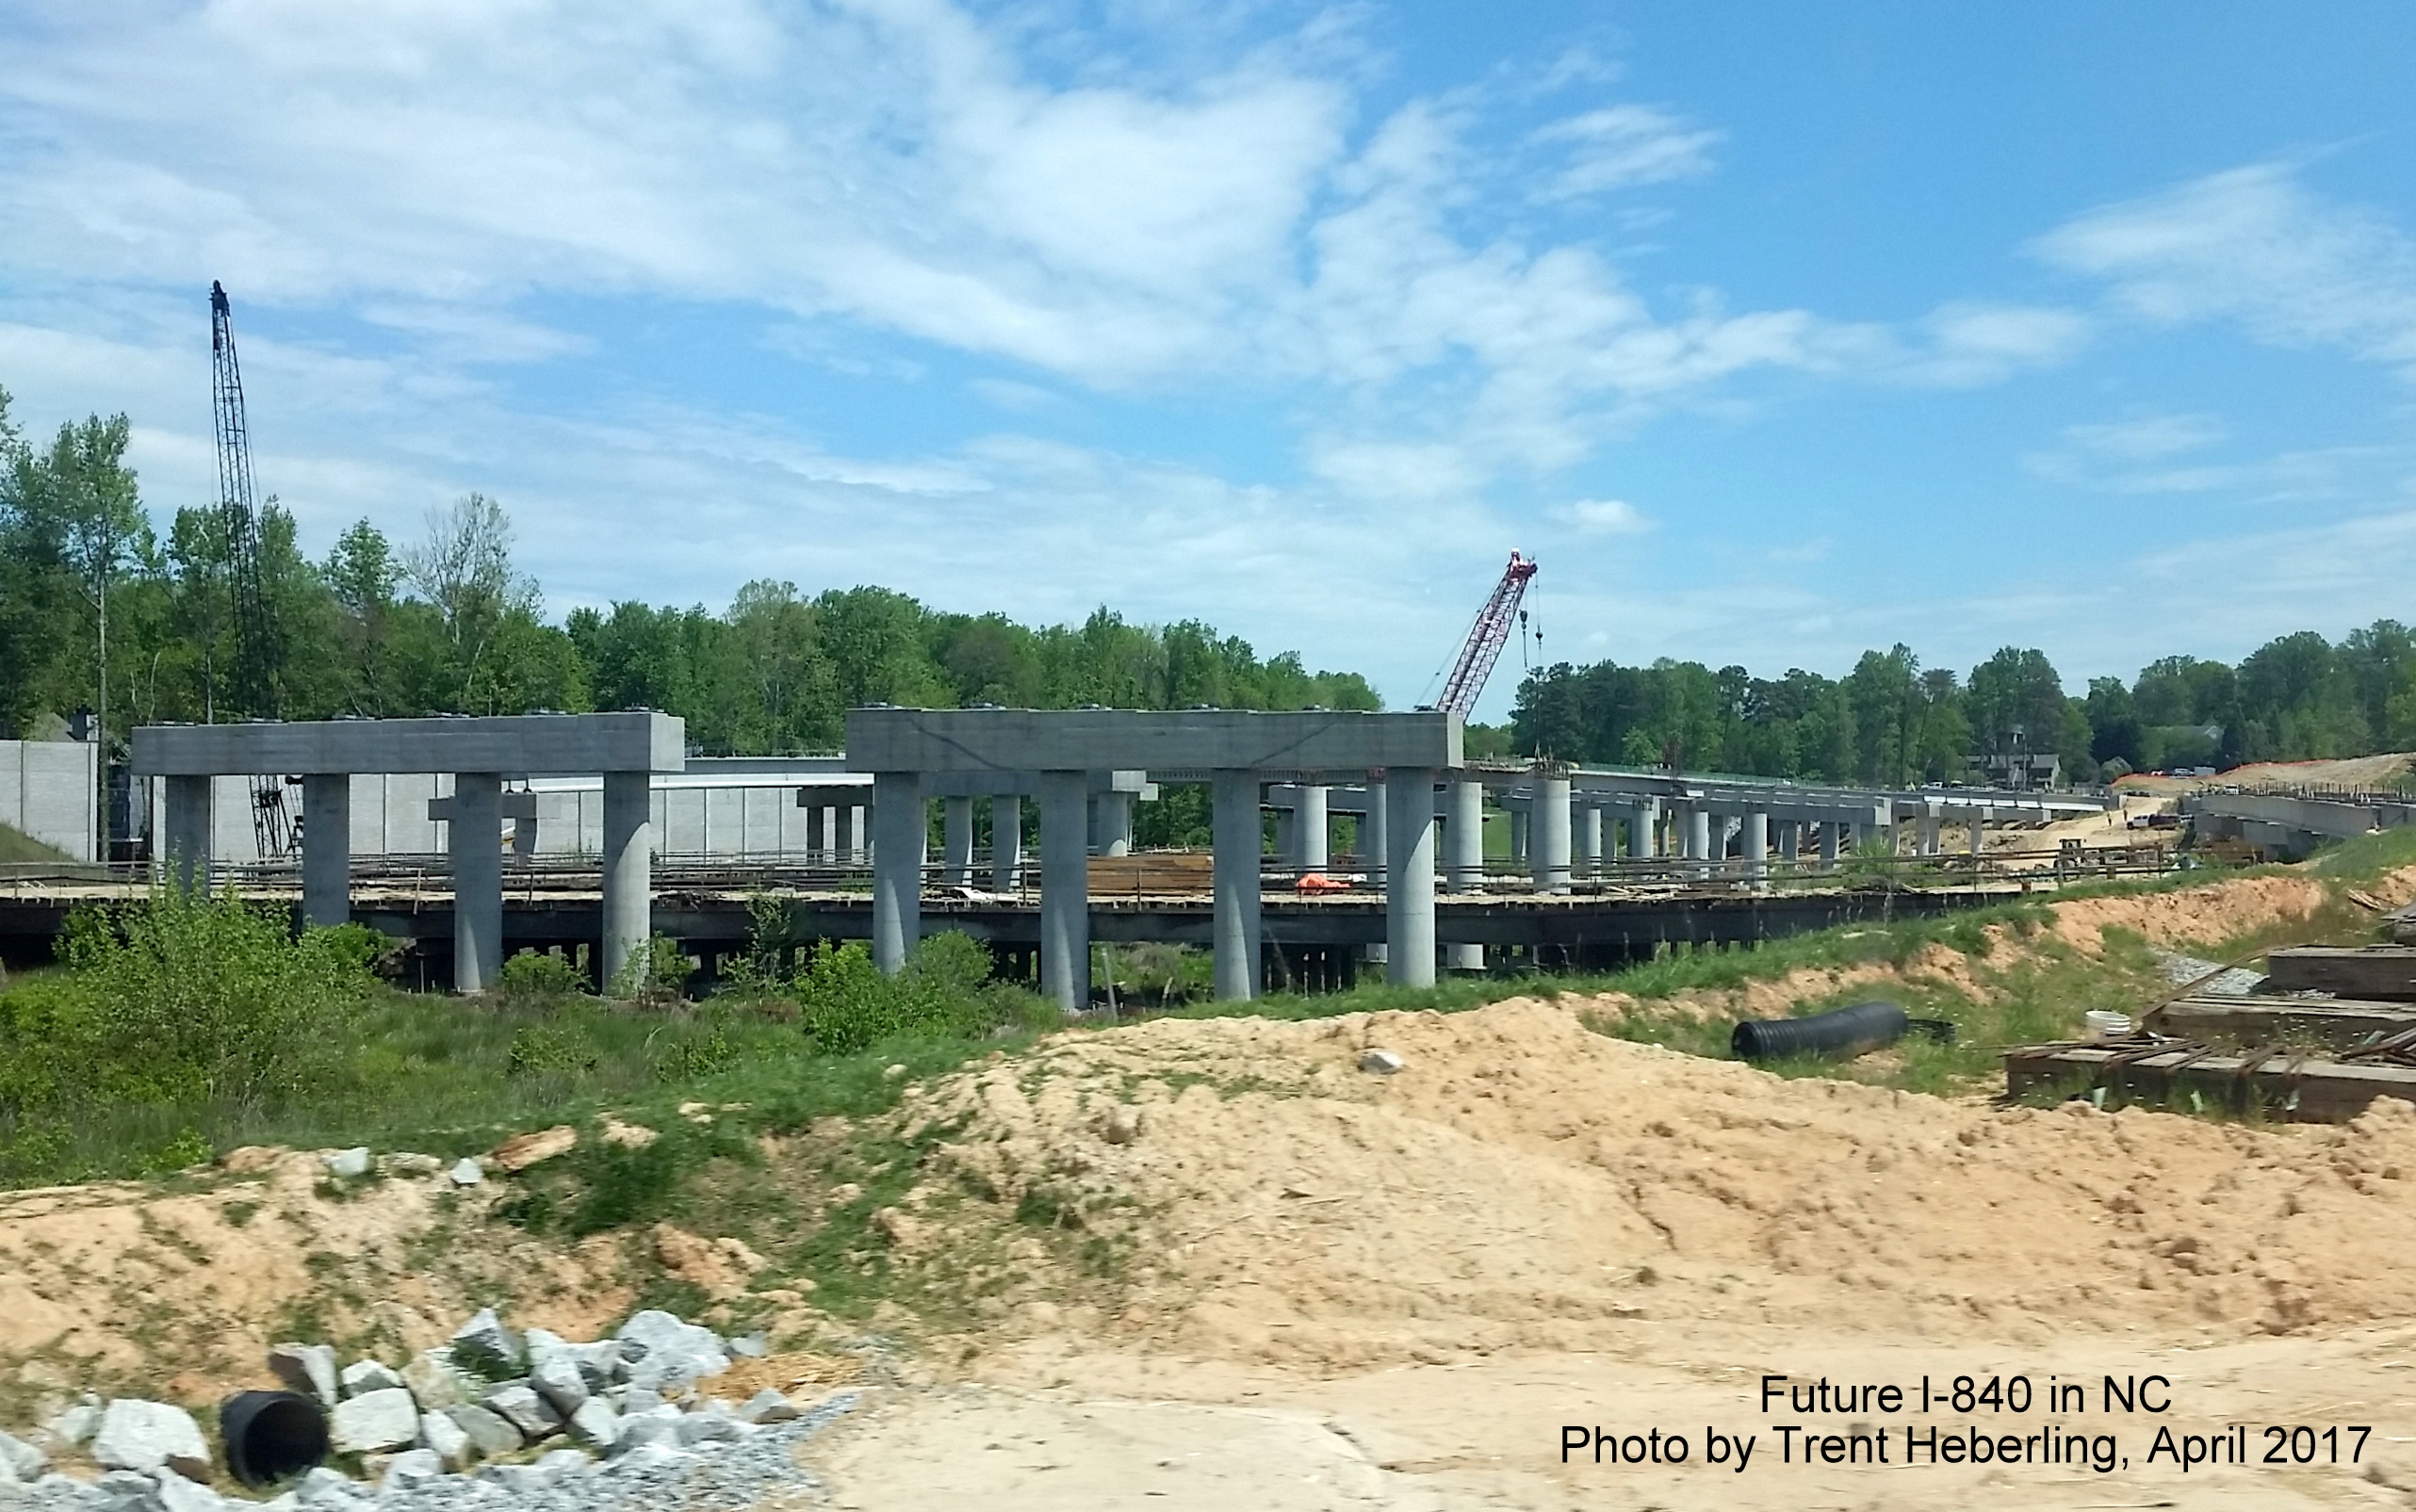 Image taken of structures for elevated I-840 highway being built near US 220/Battleground Ave in Greensboro, by Trent Heberling